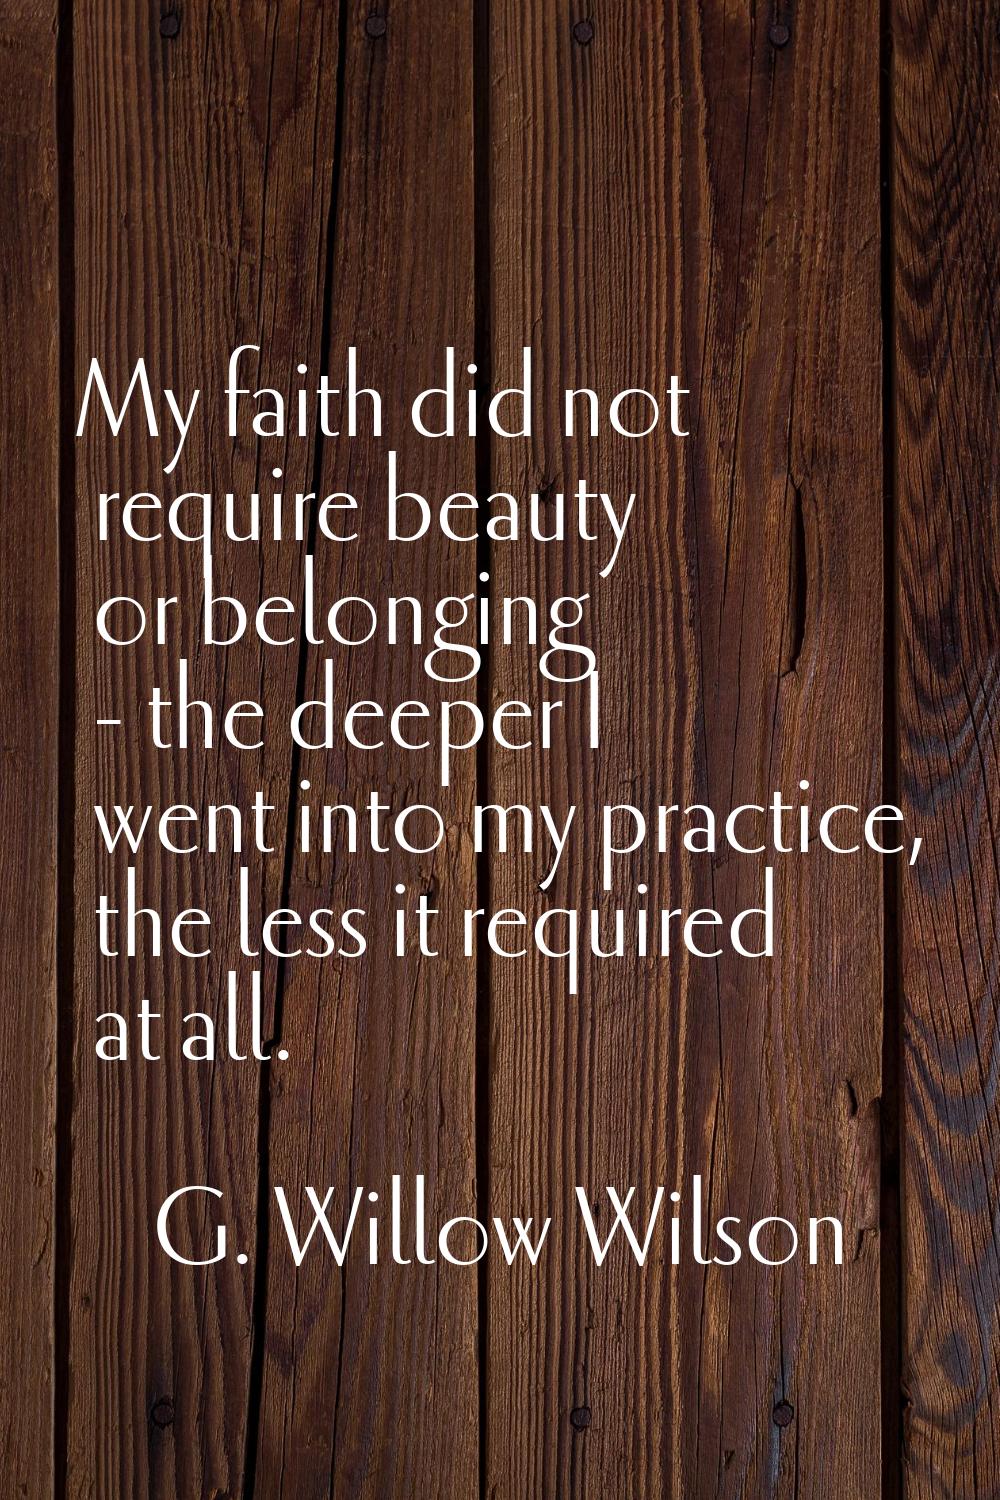 My faith did not require beauty or belonging - the deeper I went into my practice, the less it requ